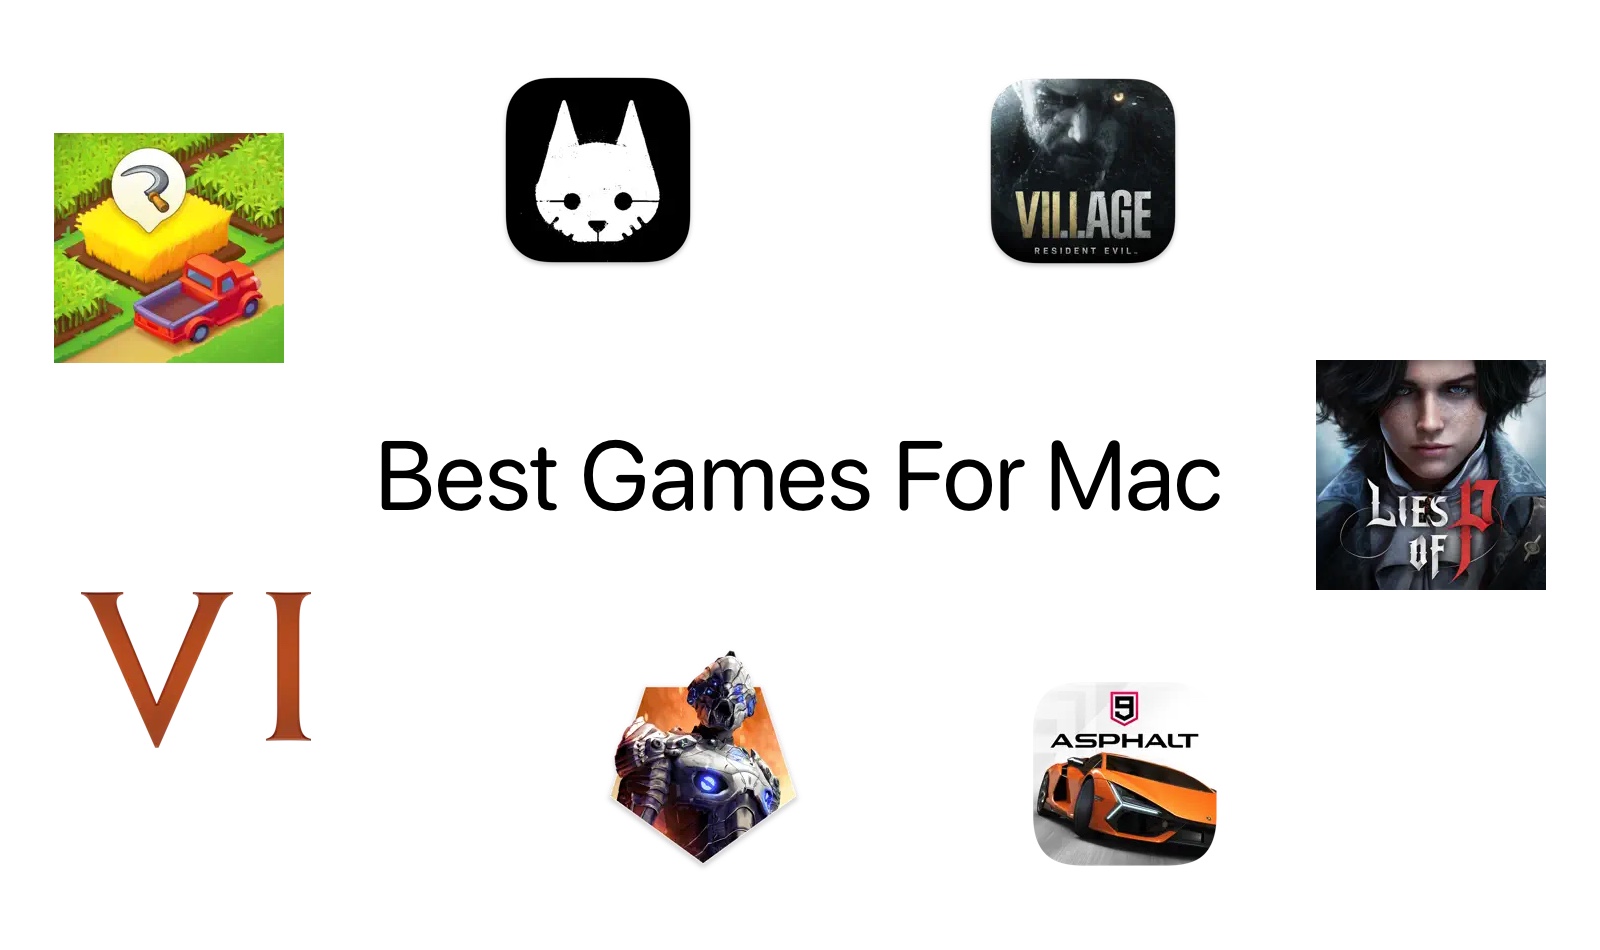 What are some of the best games for Mac?